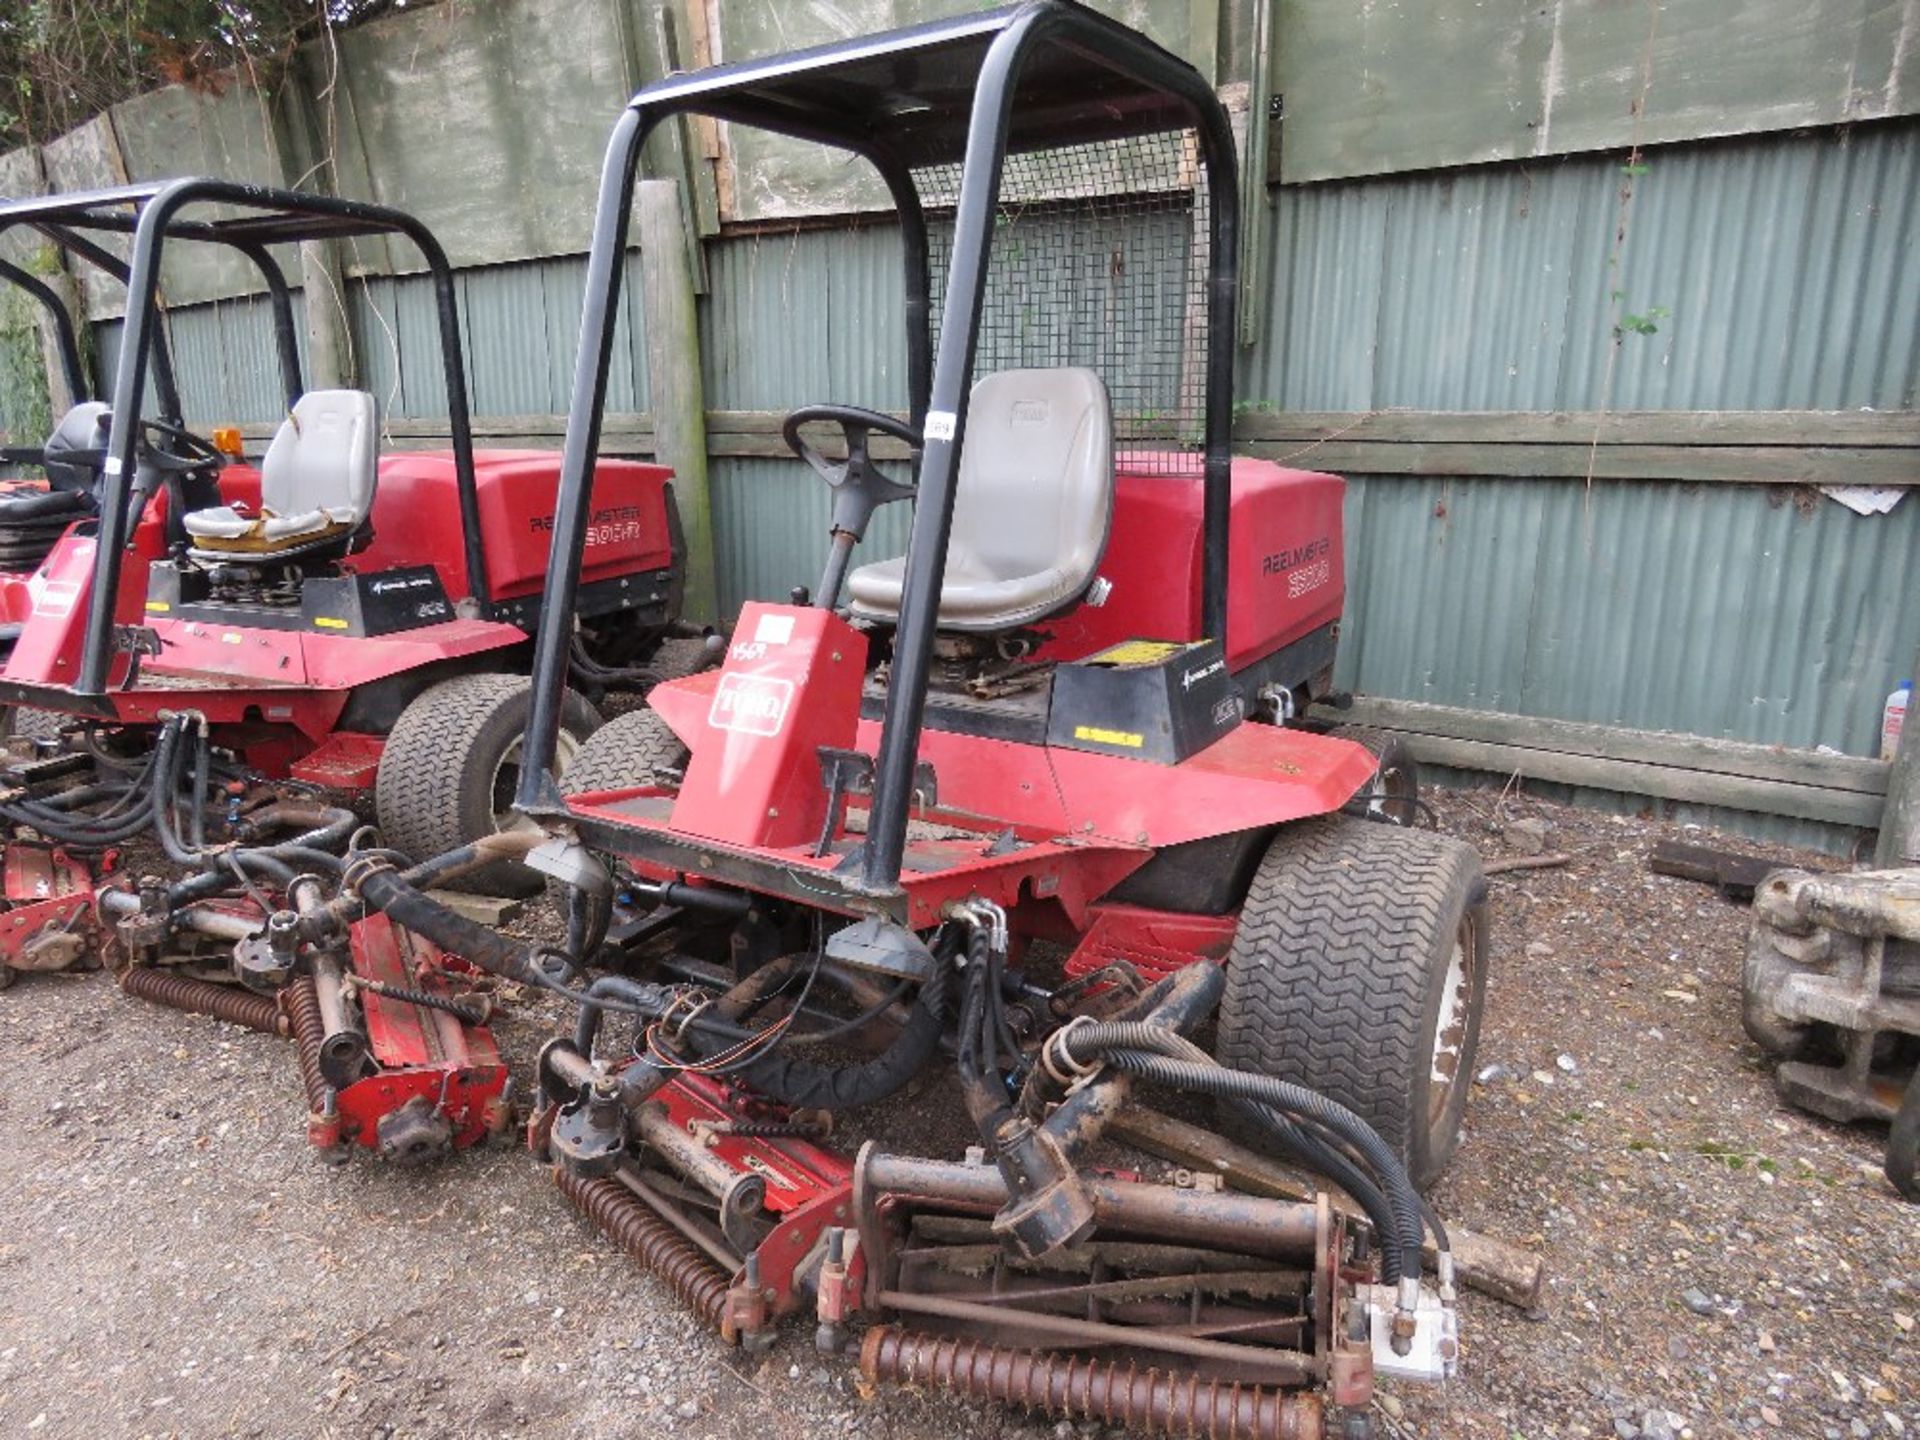 TORO REELMASTER 6500D 5 GANG 4WD MOWER, EX GOLF COURSE. WHEN TESTED WAS SEEN TO RUN, DRIVE AND BLADE - Image 2 of 5